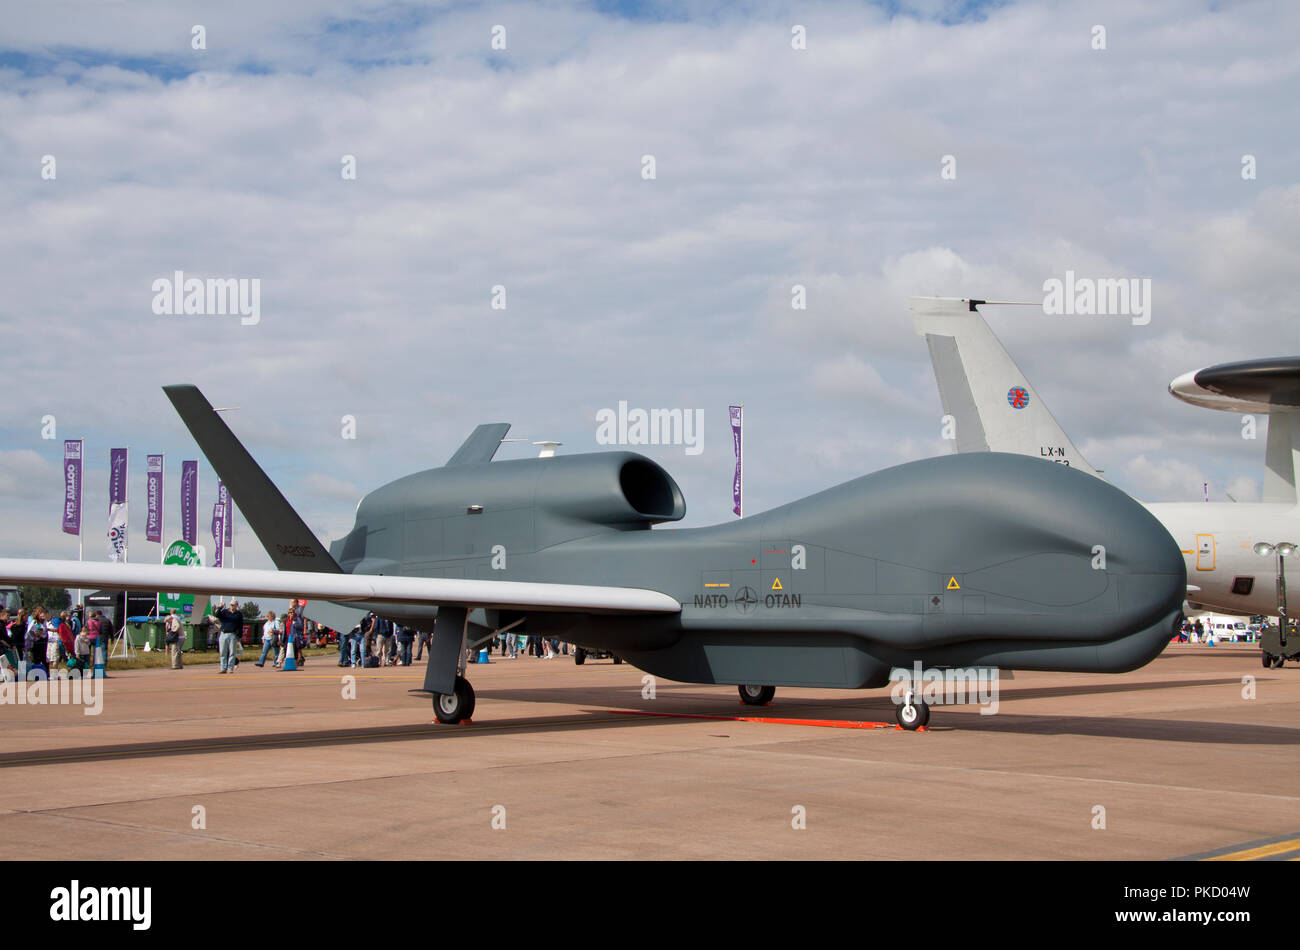 United States Air Force Northrop Grumman RQ-4B Global Hawk serial number 04-2015 which is an unmanned surveillance aircraft on display at an airshow. Stock Photo